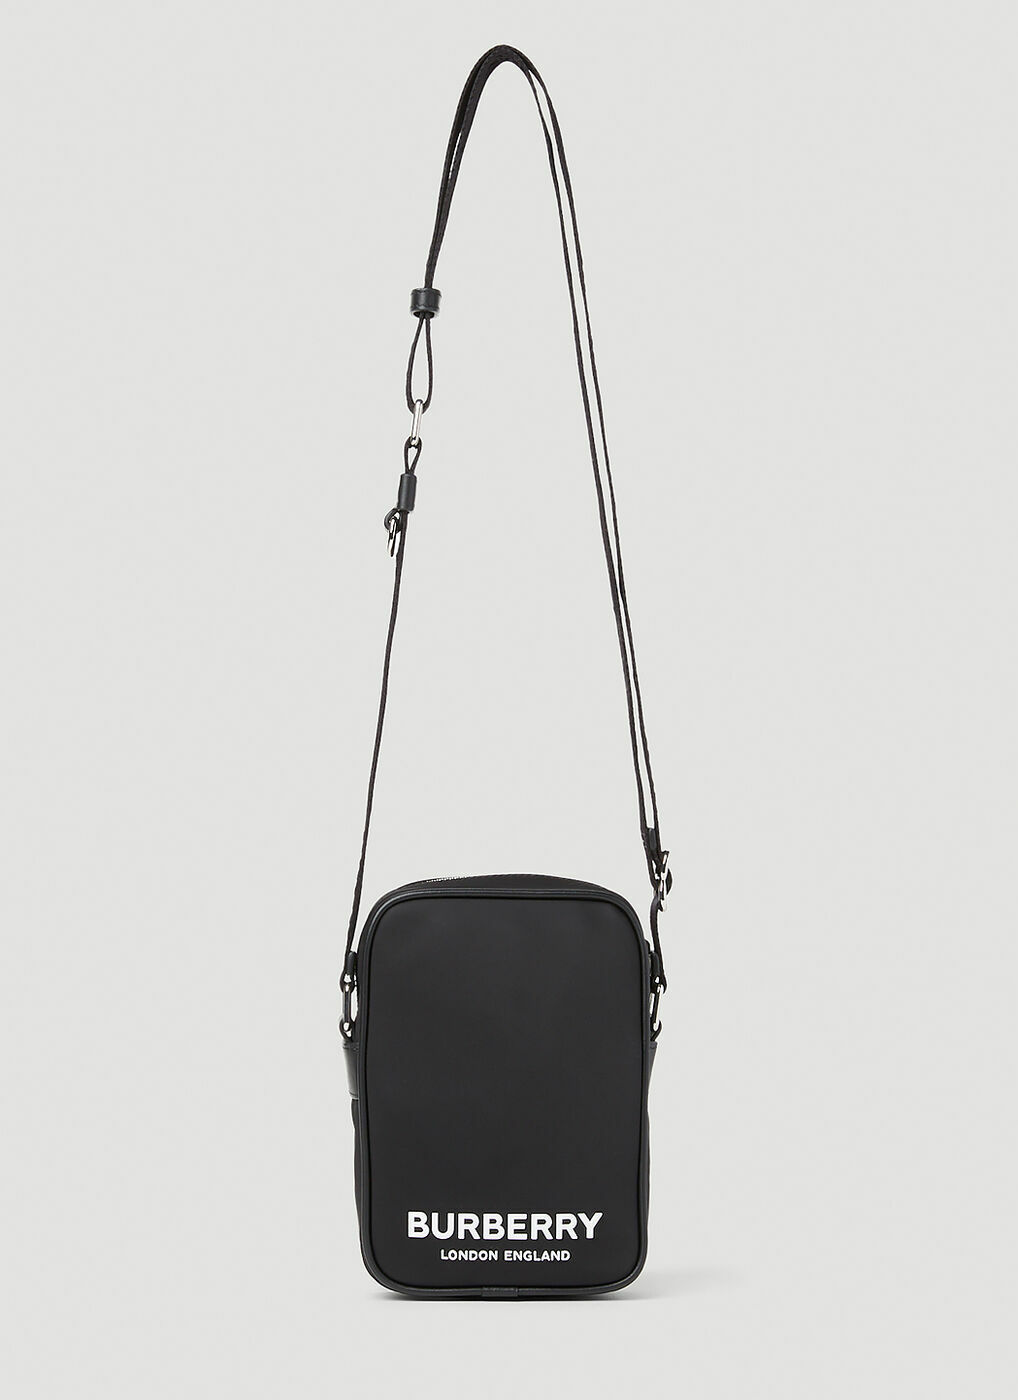 Burberry - Paddy Phone Shoulder Bag in Black Burberry